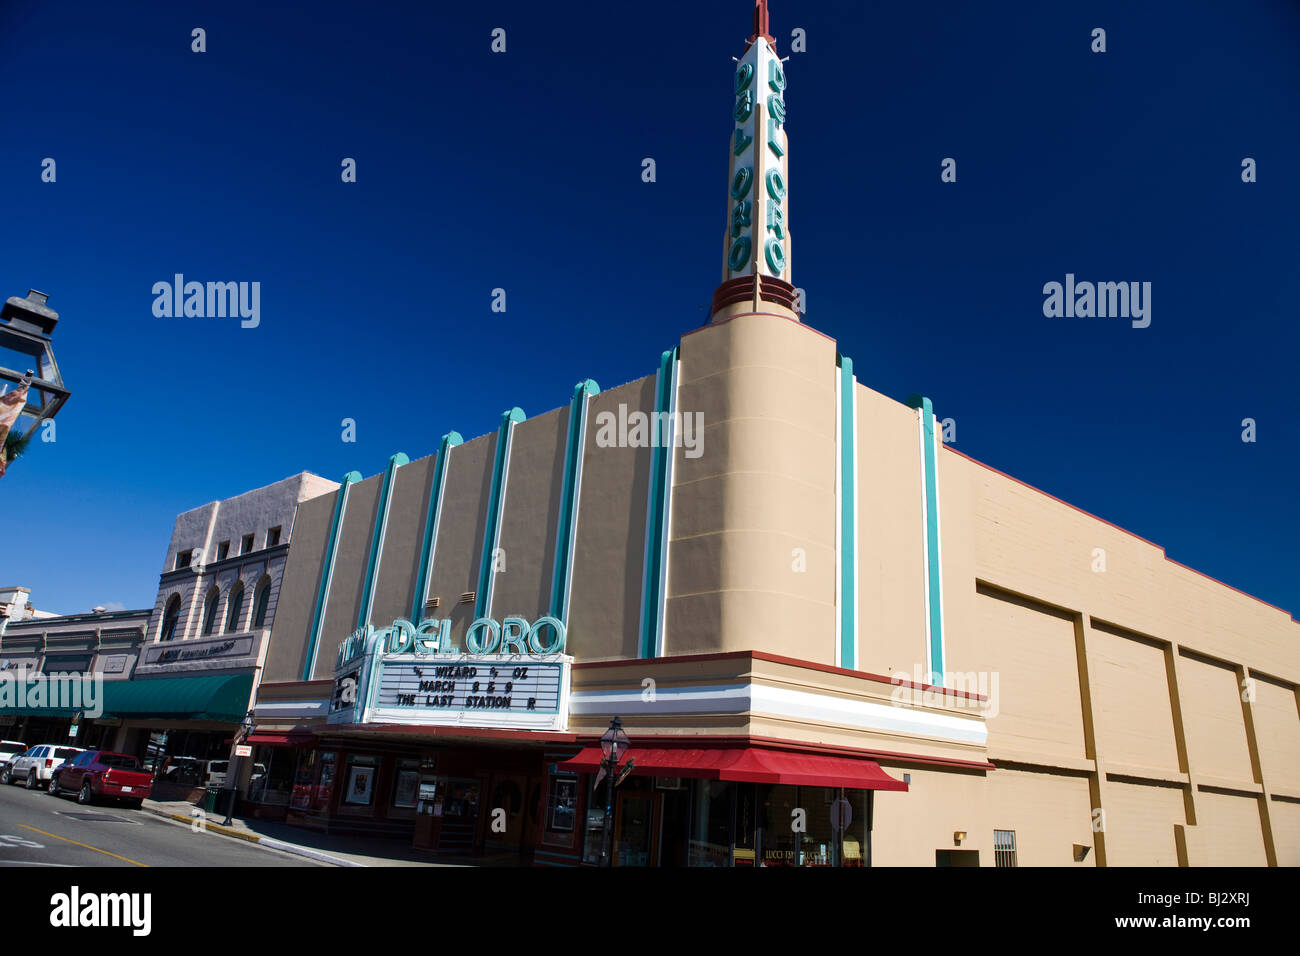 The Del Oro Theatre, an art deco landmark built in 1940 by United Artists, Grass Valley, California, United States of America Stock Photo